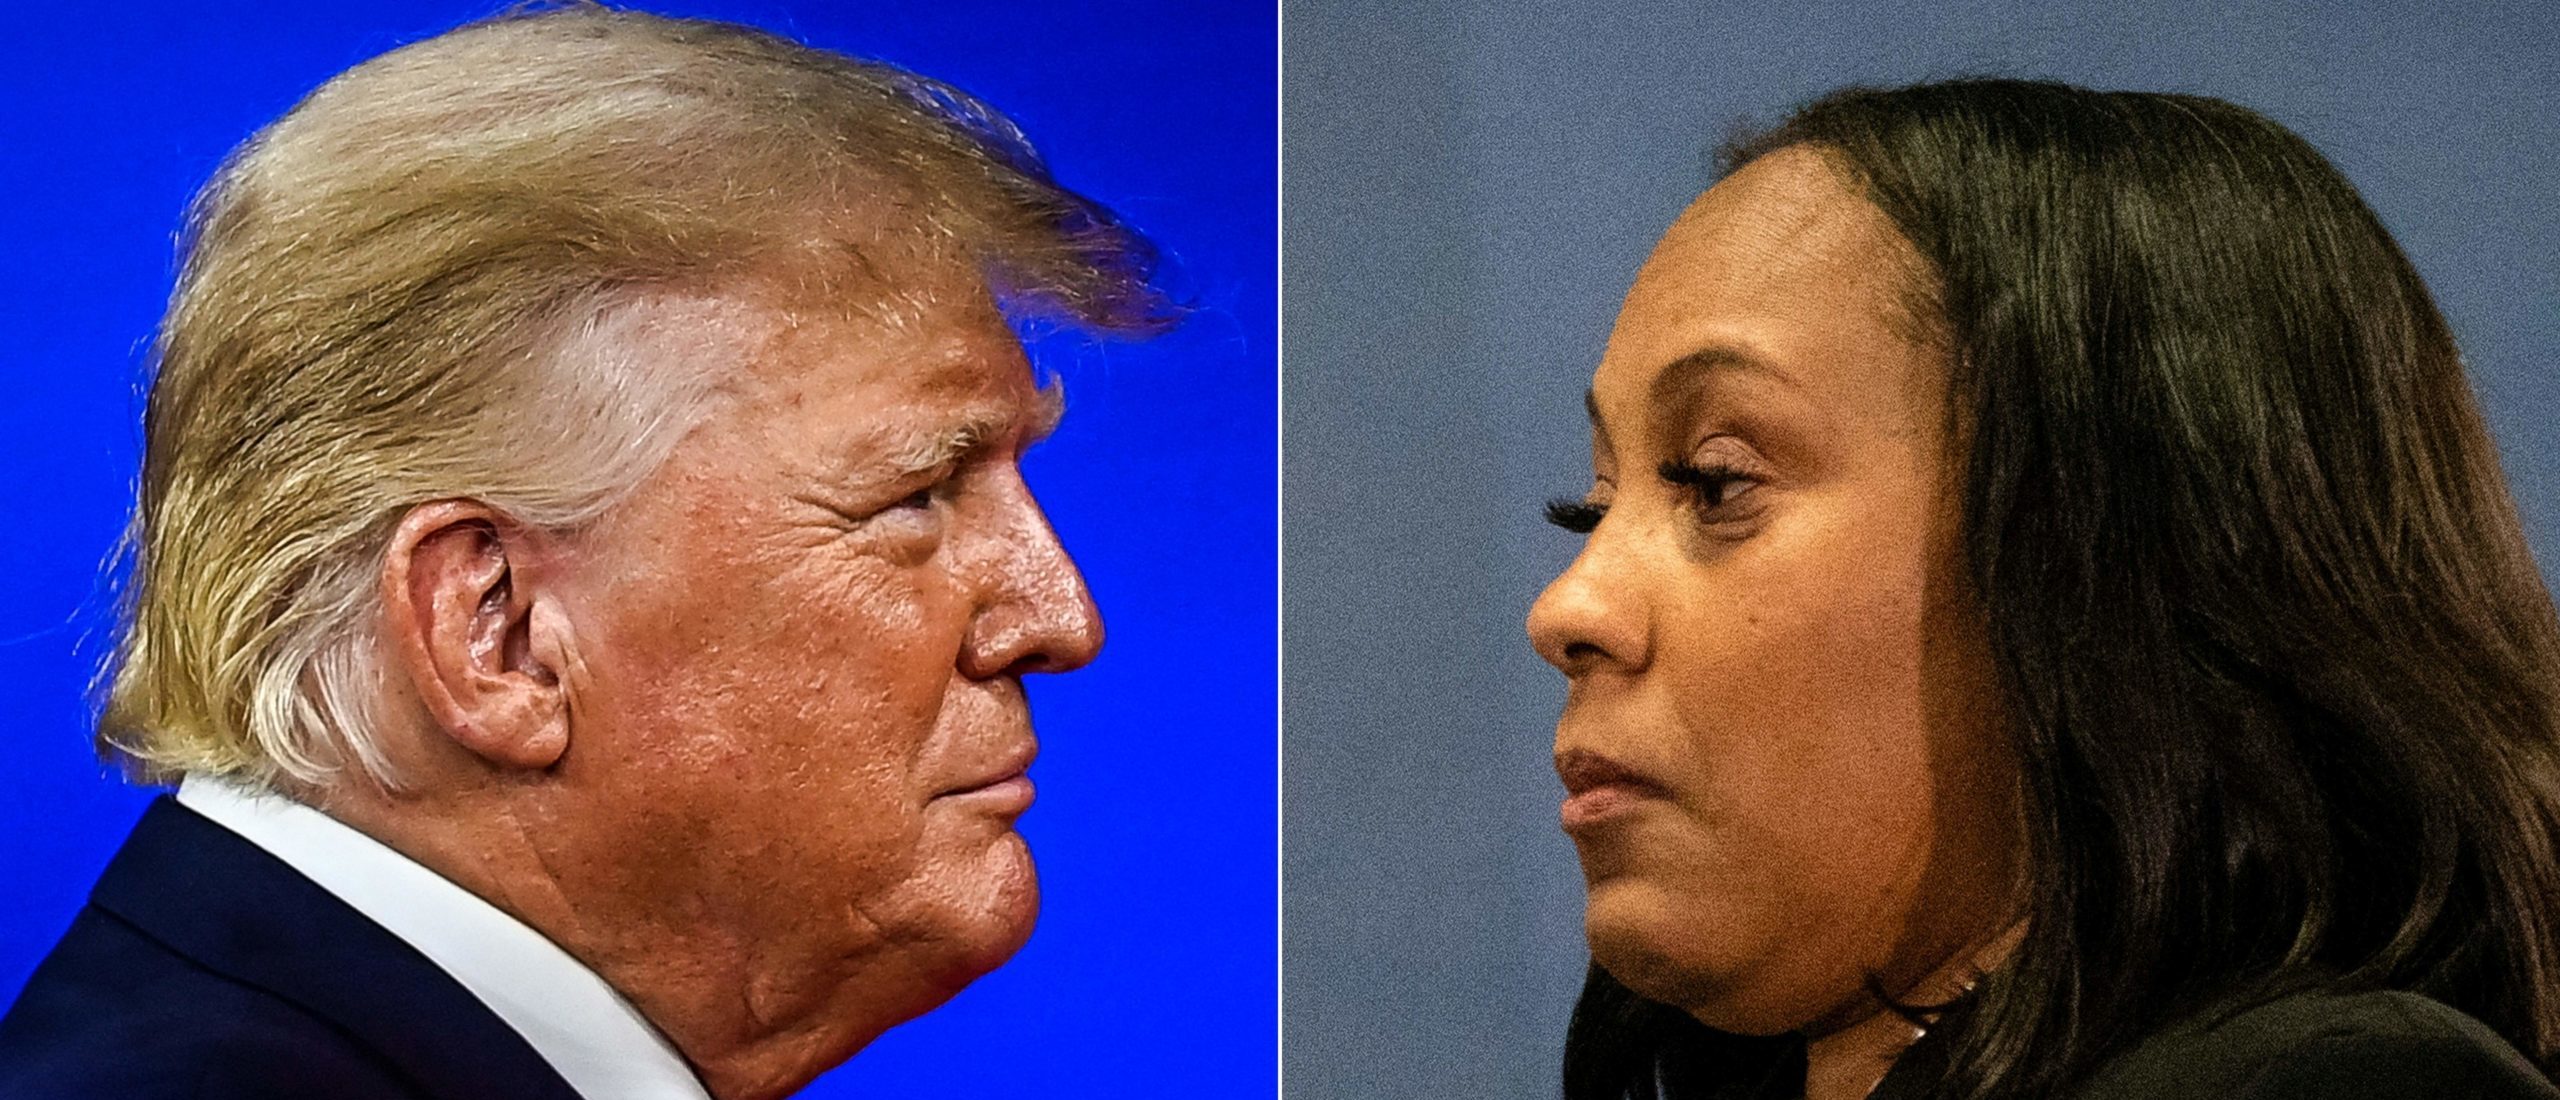 Fulton County District Attorney Fani Willis said arrest warrants had been issued for Trump and the others charged over their efforts to overturn the 2020 election and they had until August 25 to "voluntarily surrender." (Photo by CHANDAN KHANNA and Christian MONTERROSA / AFP) (Photo by CHANDAN KHANNA,CHRISTIAN MONTERROSA/AFP via Getty Images)